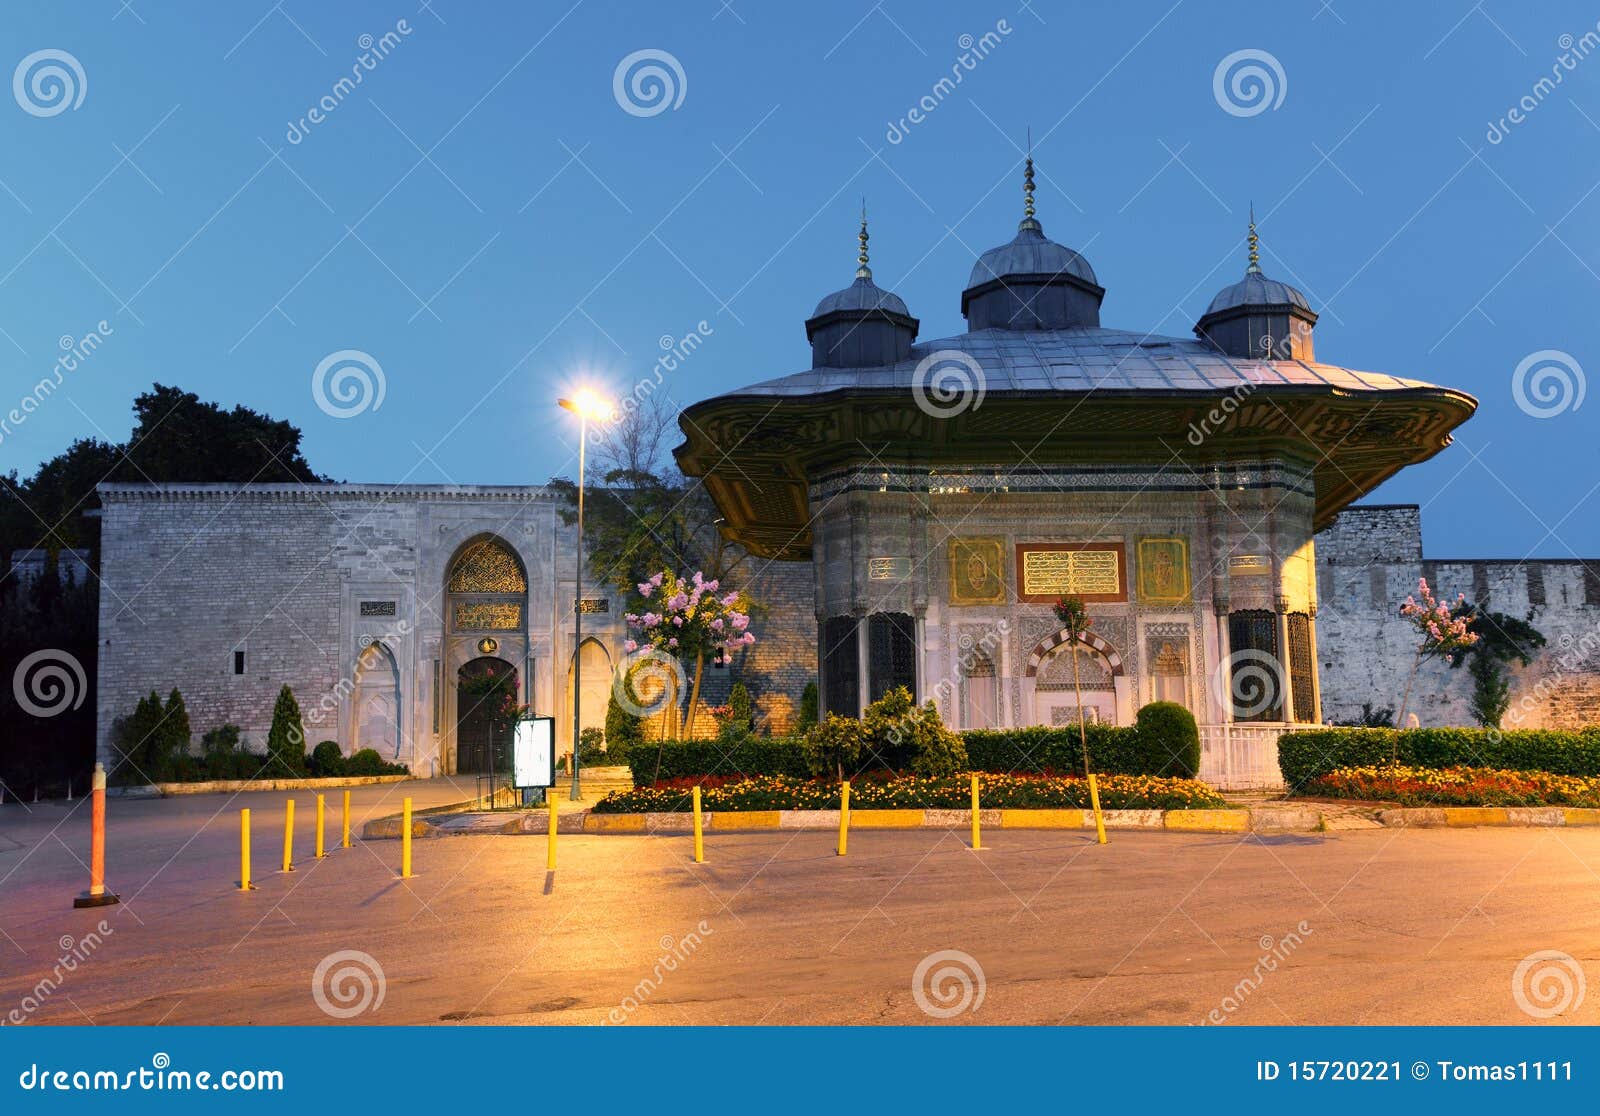 historical topkapi palace in istanbul